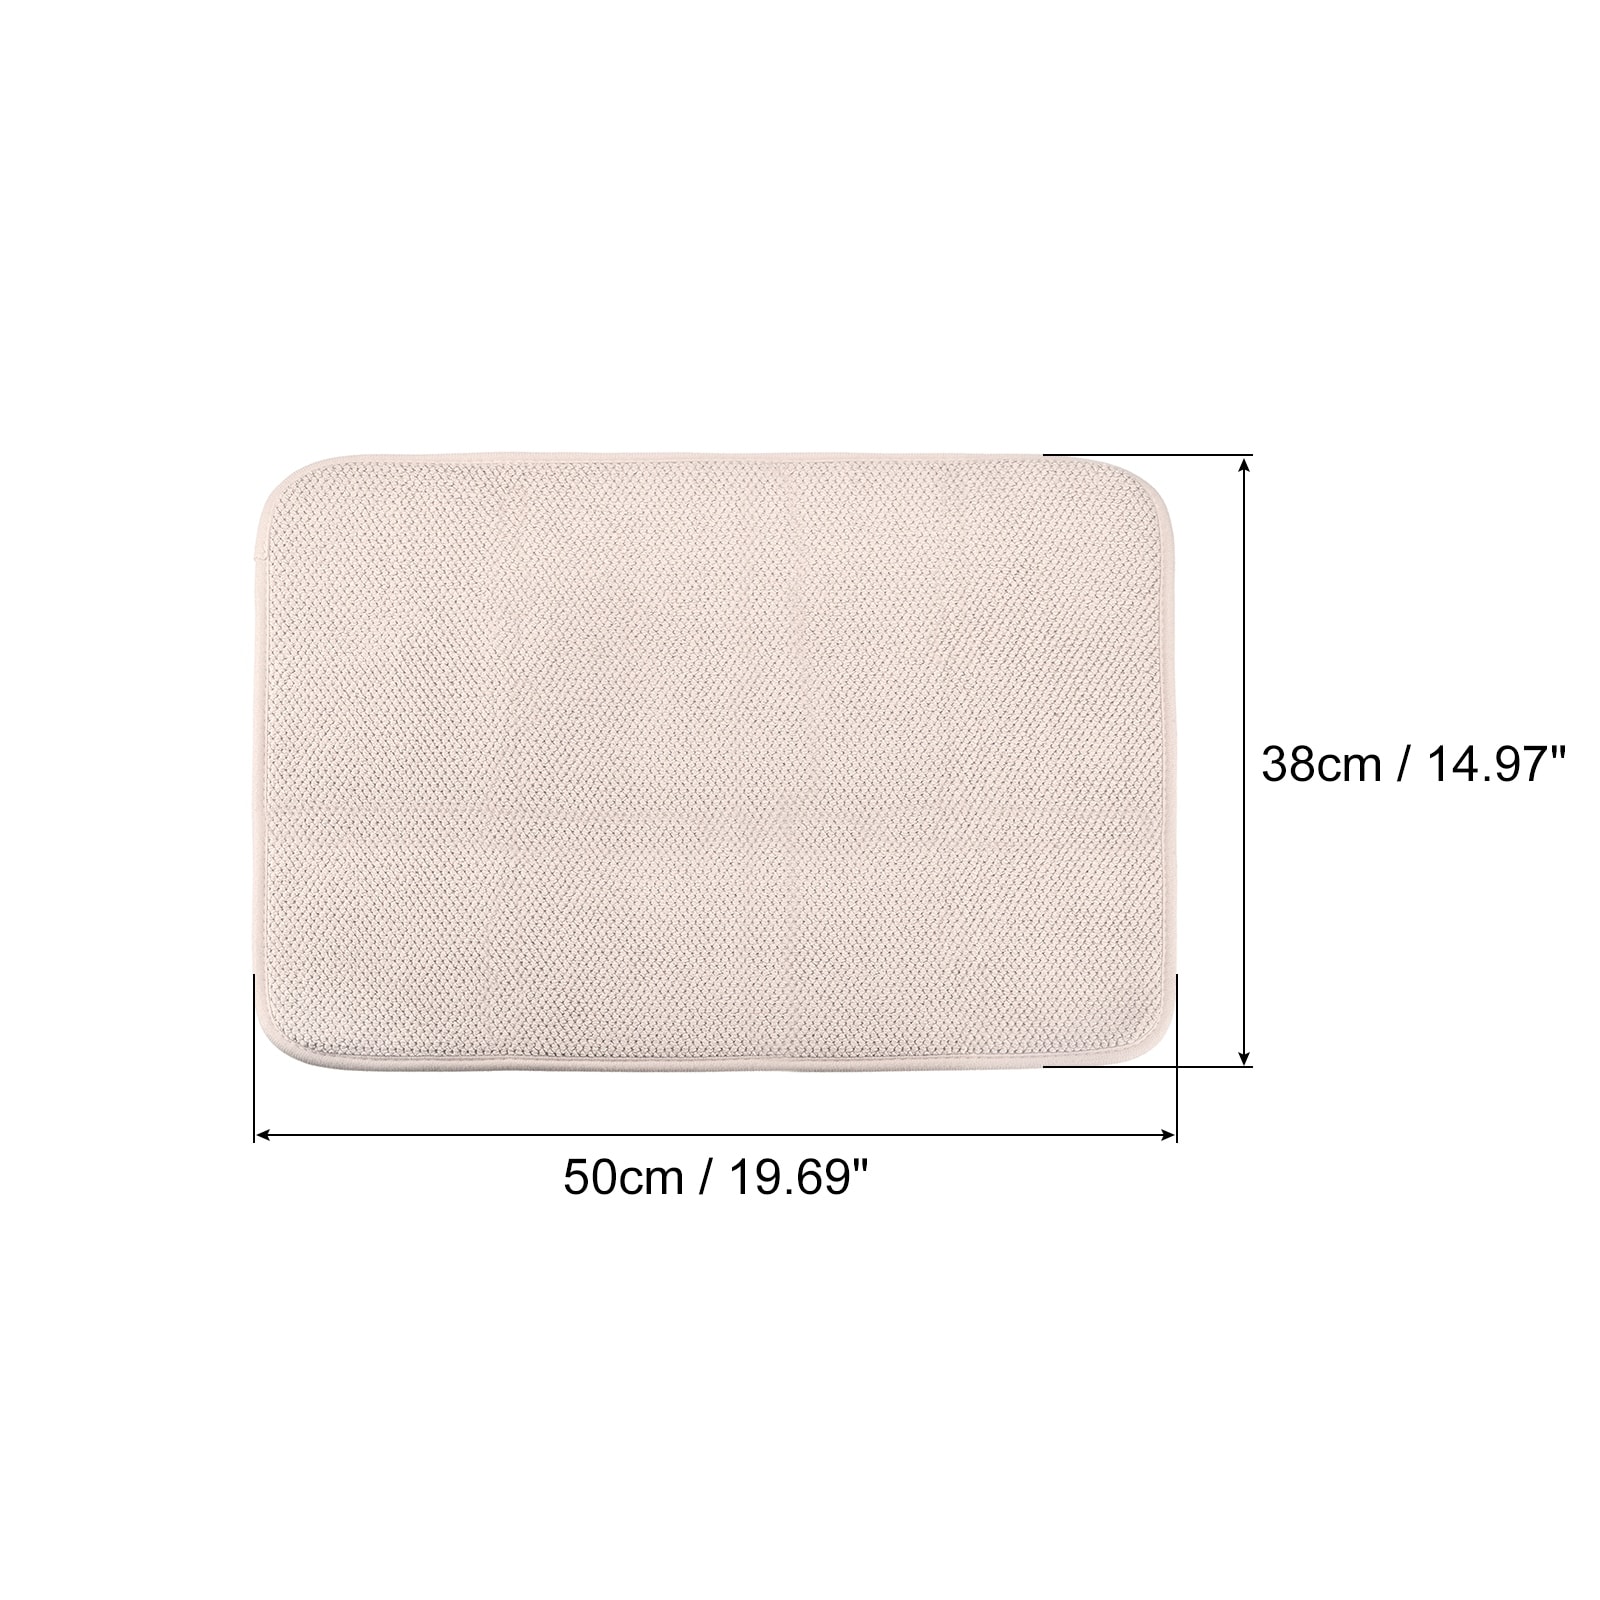 https://ak1.ostkcdn.com/images/products/is/images/direct/5f96a39d7bddca58bf743c0385d365a0994a77d2/Microfiber-Dish-Drying-Mat-Kitchen-Sink-Drainer-Tea-Towel-Red.jpg